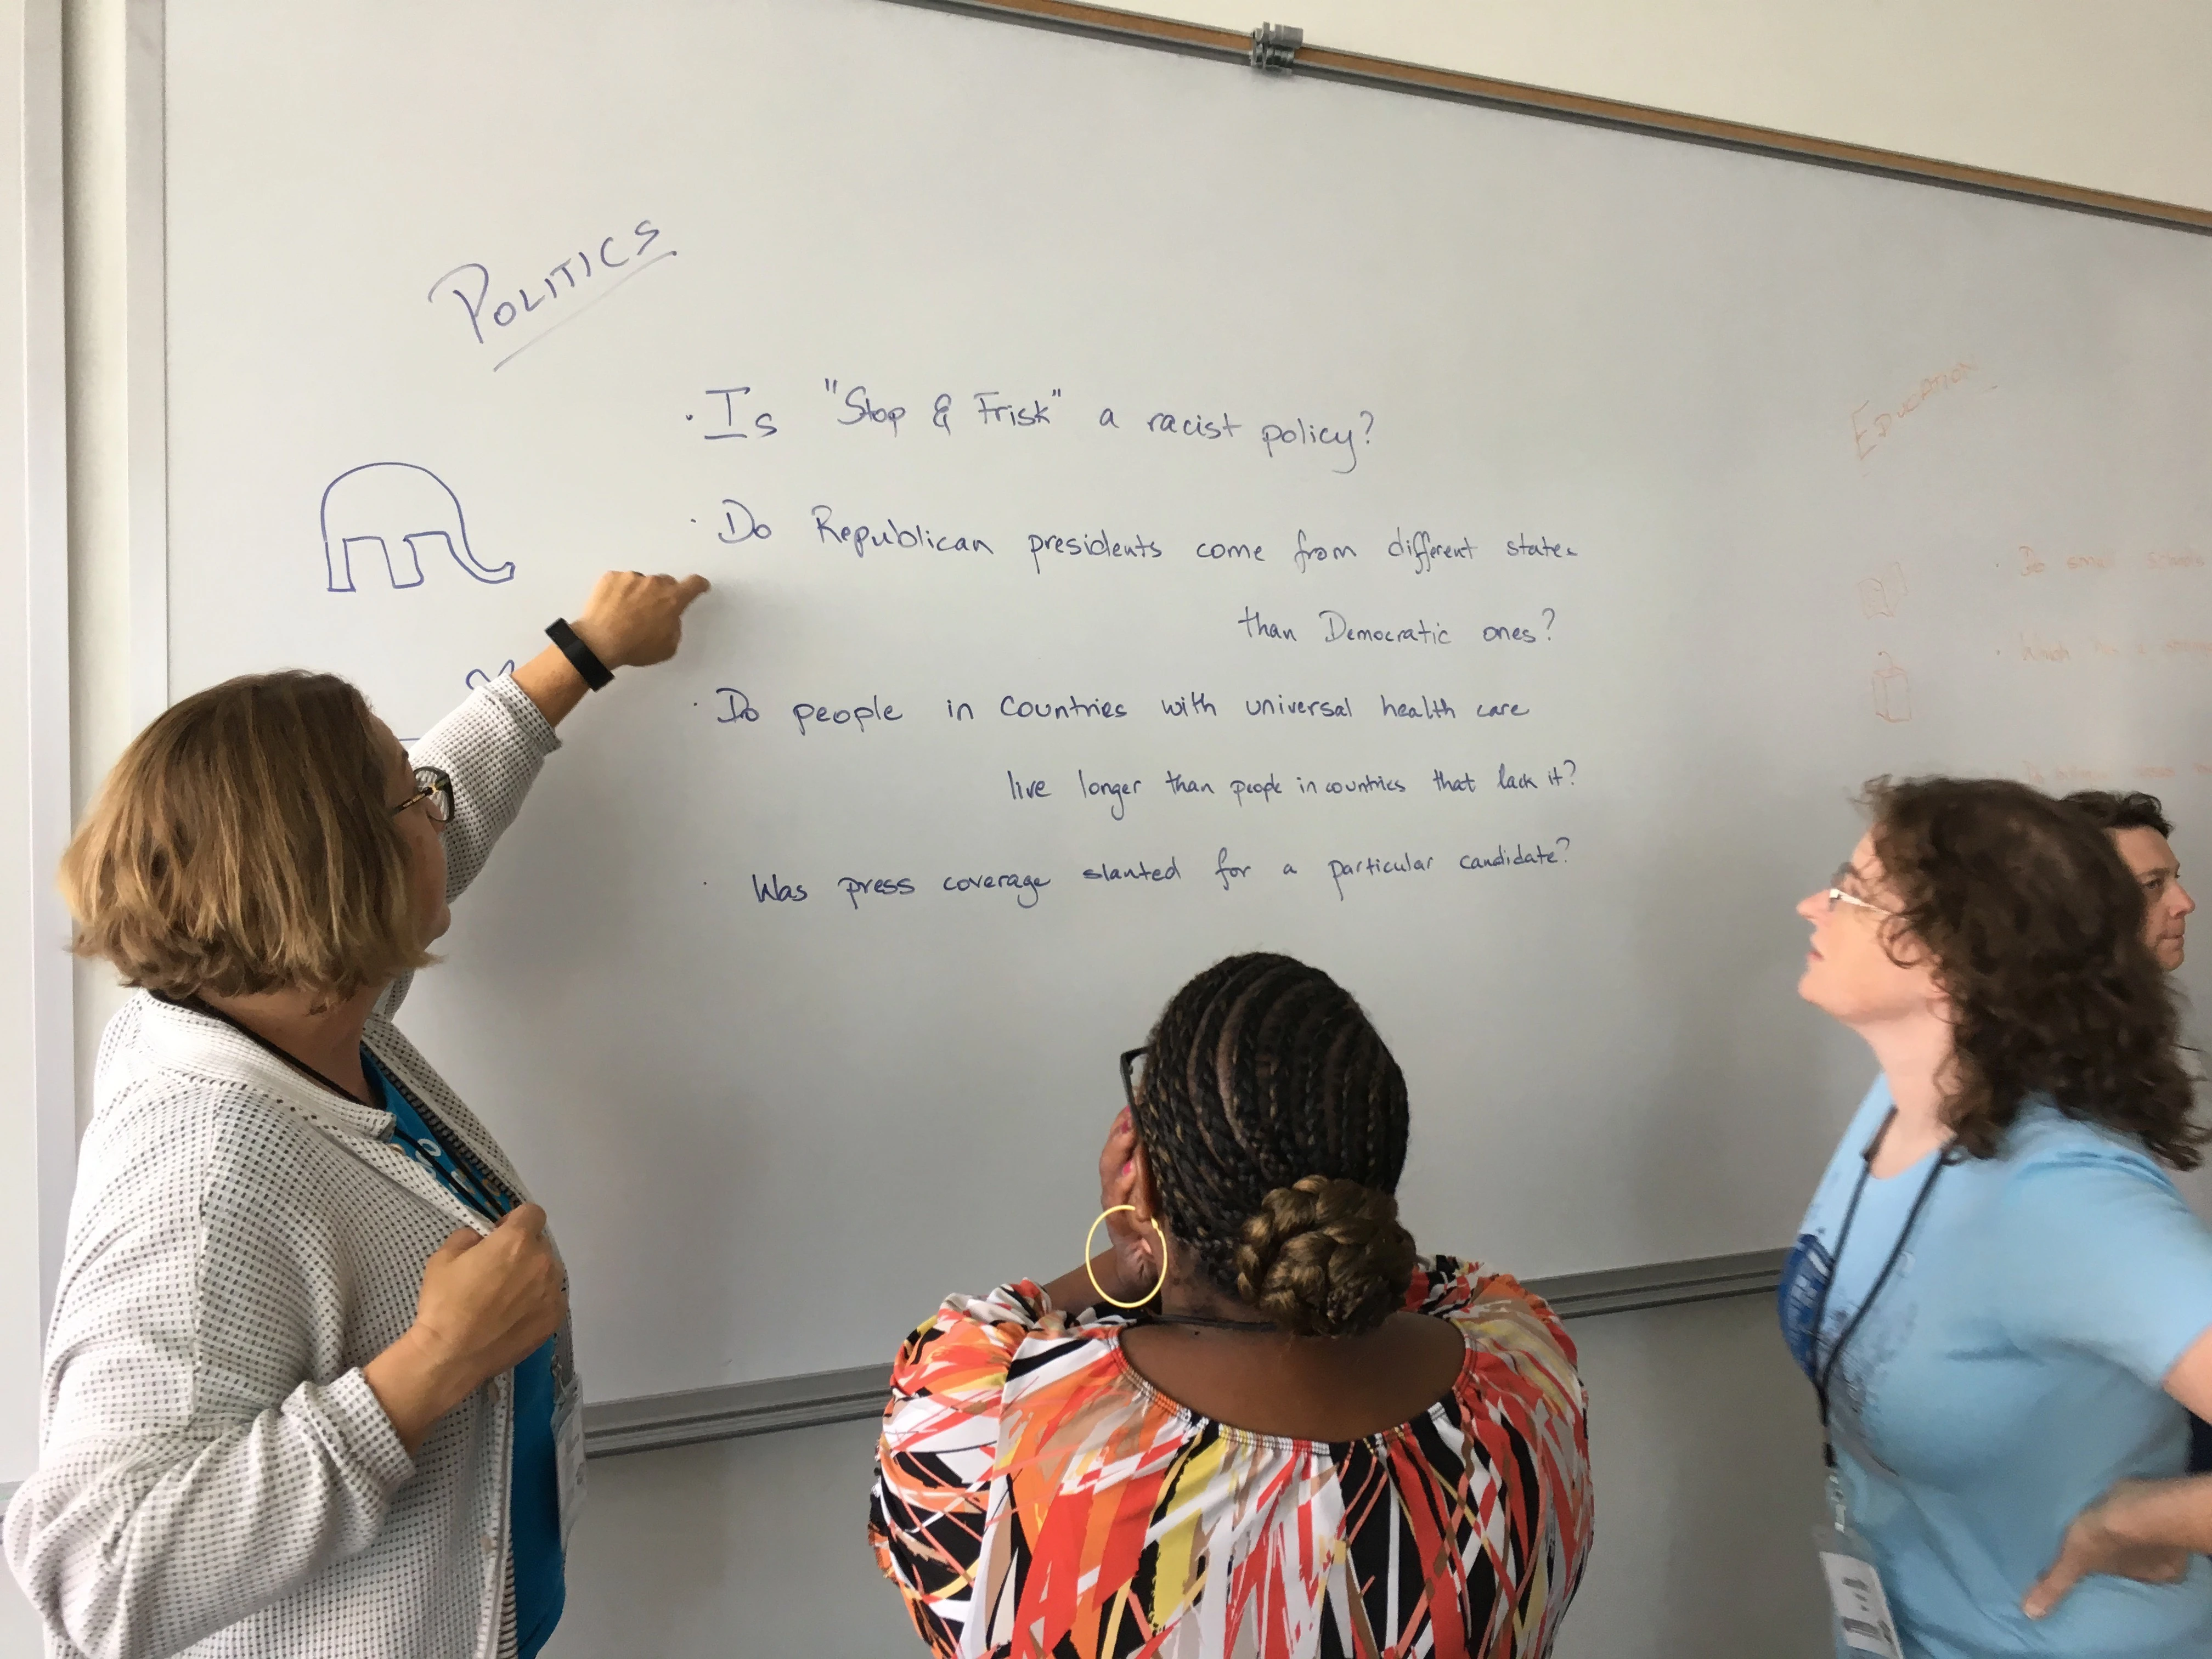 A woman mentor and two female students discuss data science points on a classroom whiteboard.